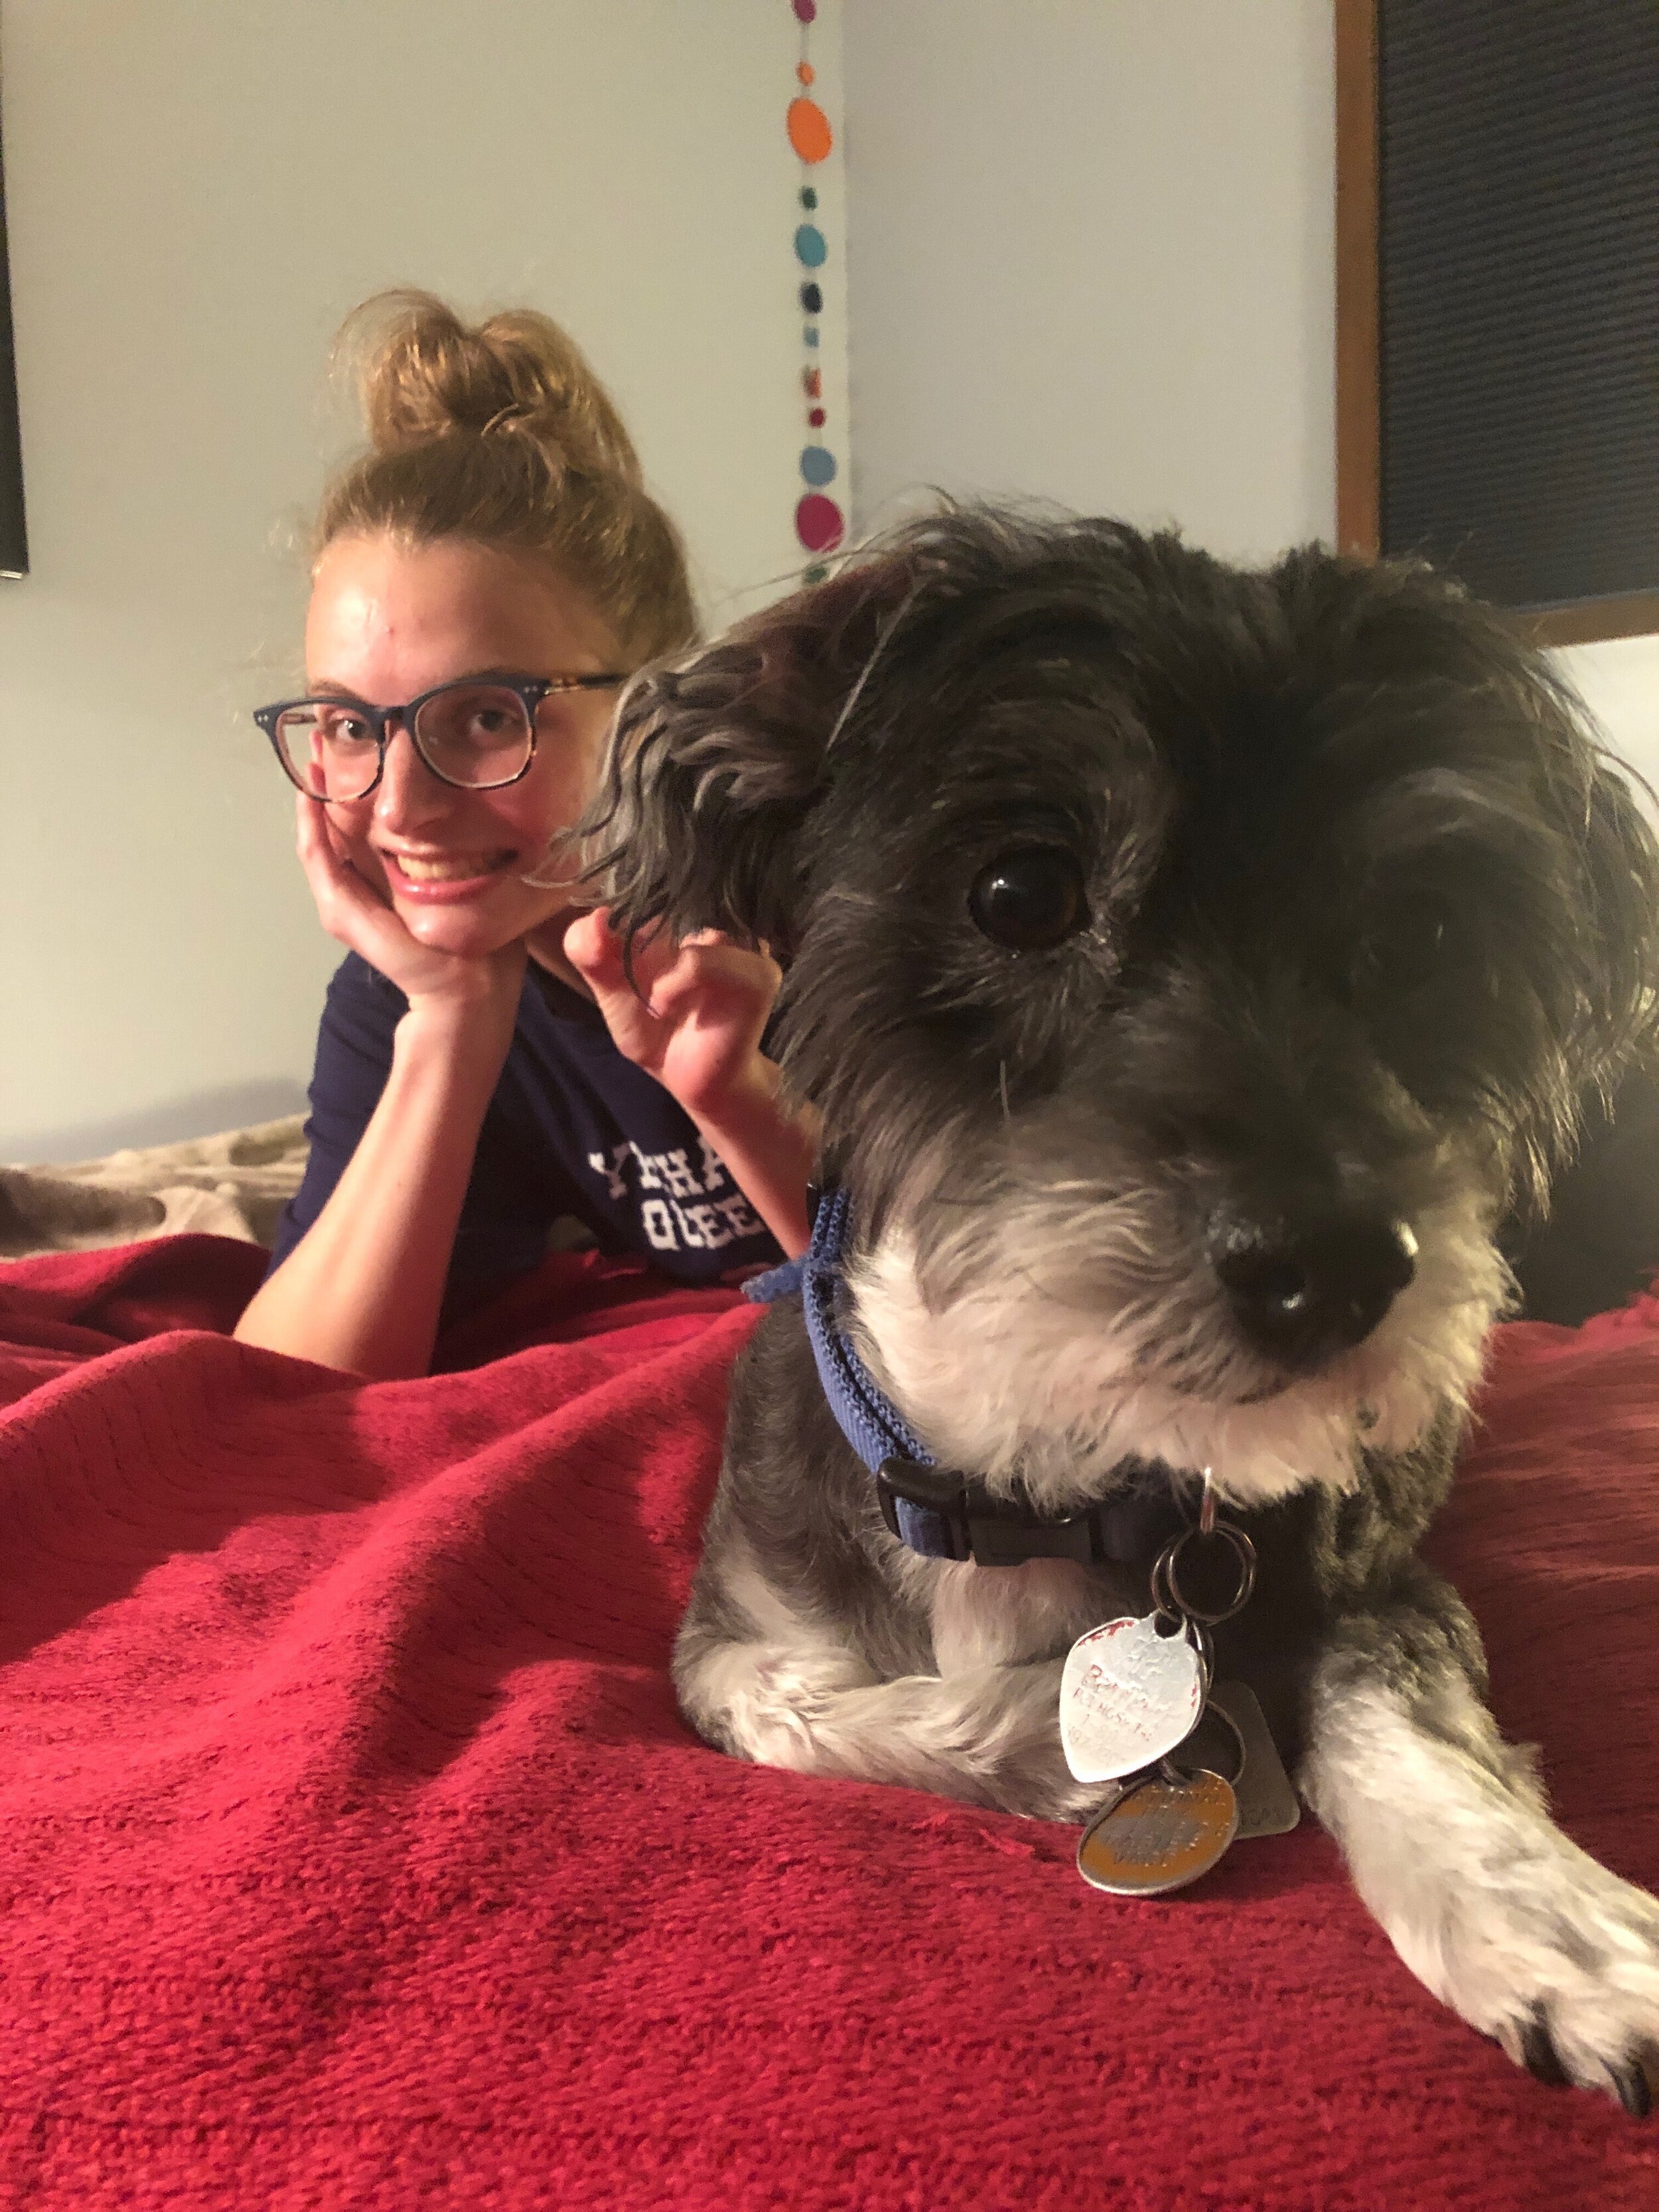 Hannah Guiley ‘22 (Sonography) is in good company in quarantine with her sister Cassie and her dog Charlie.